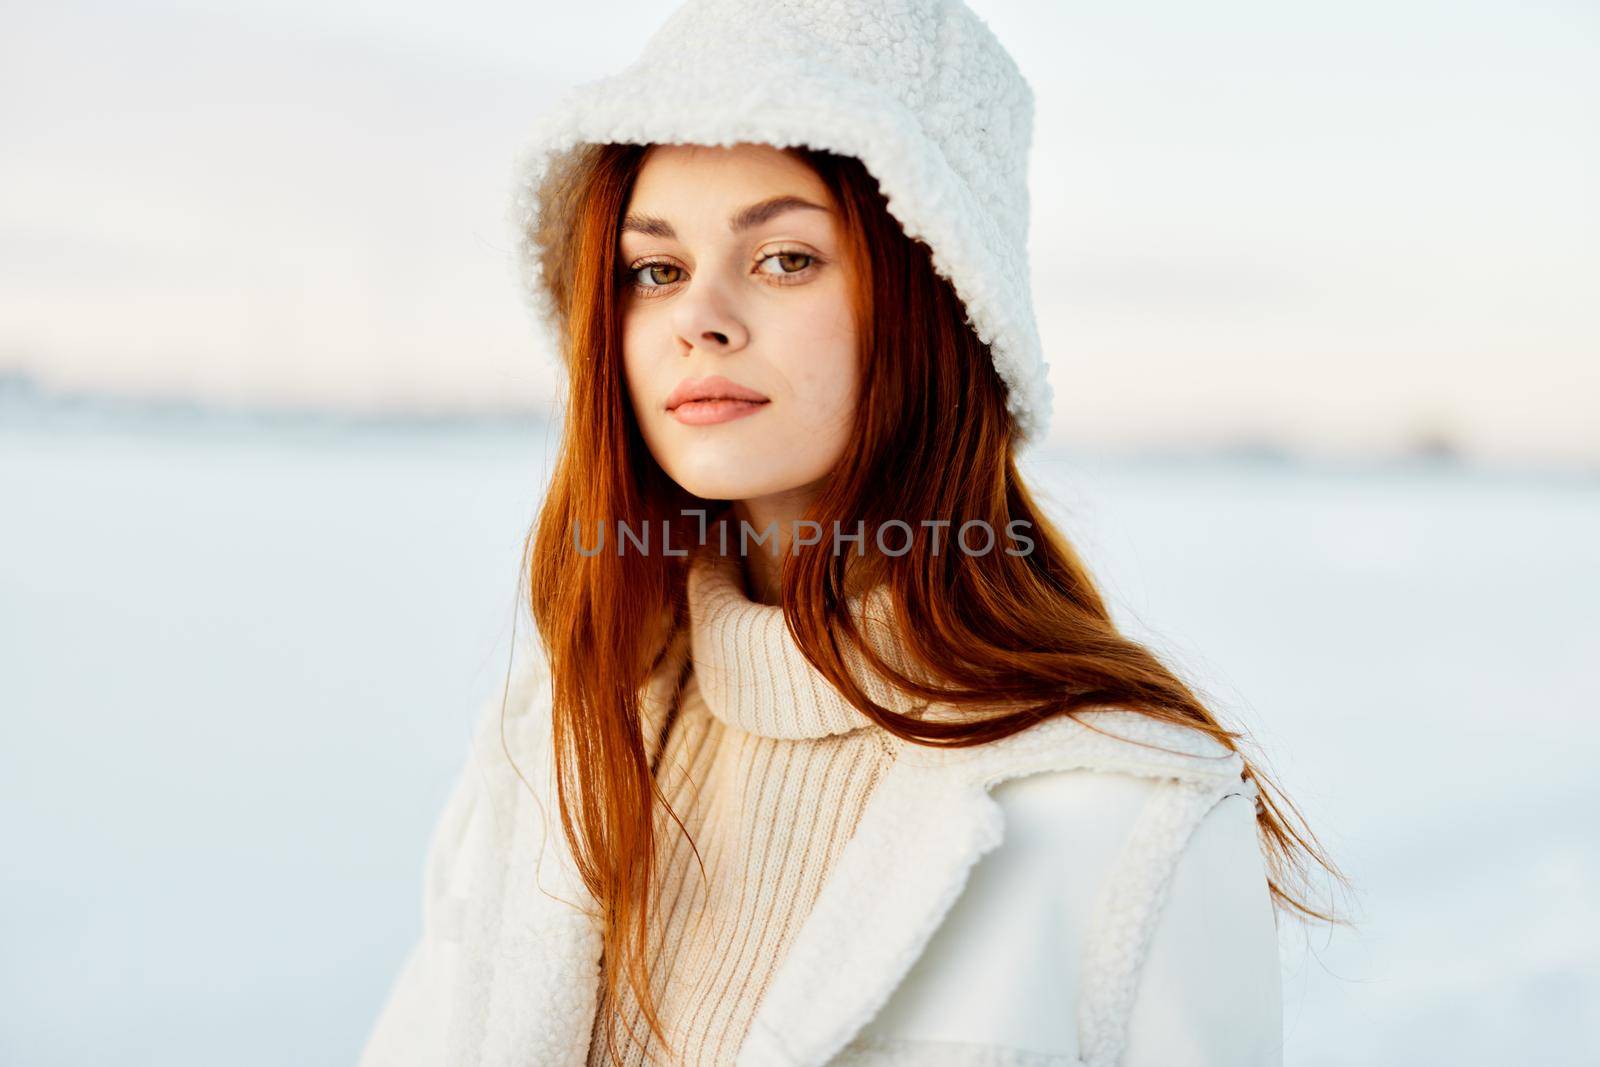 beautiful woman winter weather snow posing nature rest nature. High quality photo